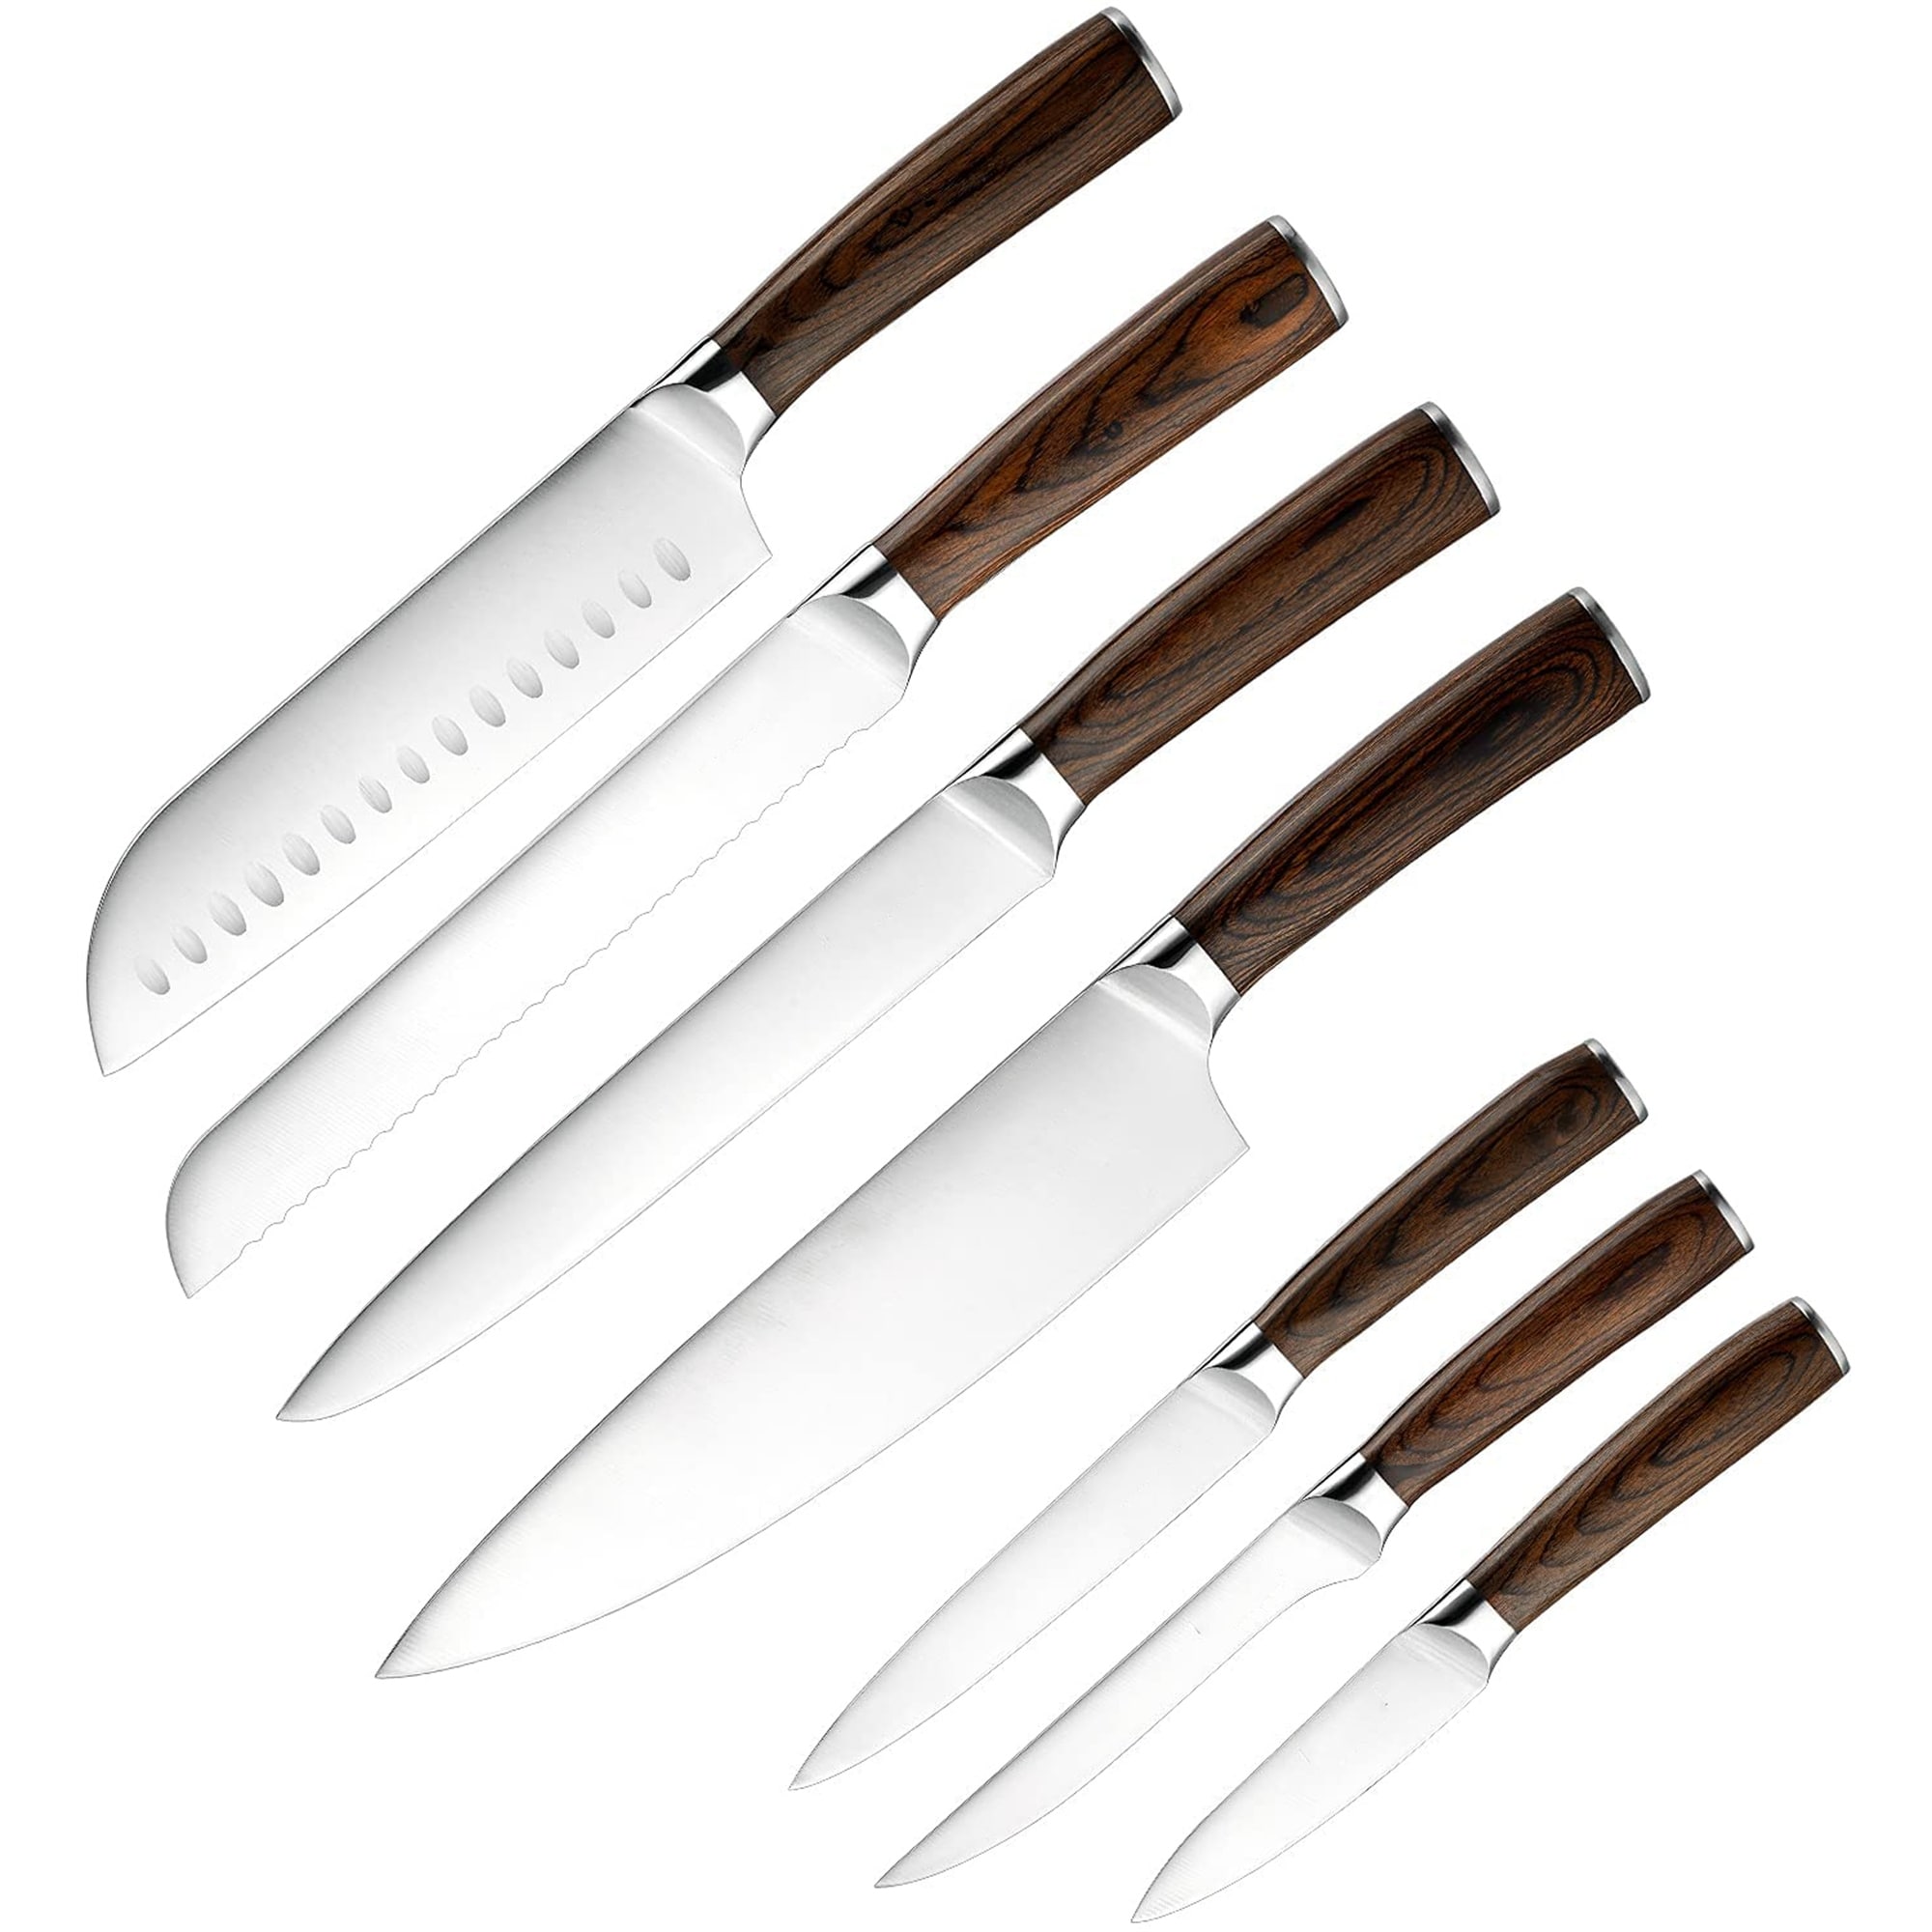 https://ak1.ostkcdn.com/images/products/is/images/direct/4c20dd8ebcee10065a624628aadcc36e2b68b8e8/7PCS-Chef-Knife-Set%2C-Ultra-Sharp-Kitchen-Cutlery-set.jpg